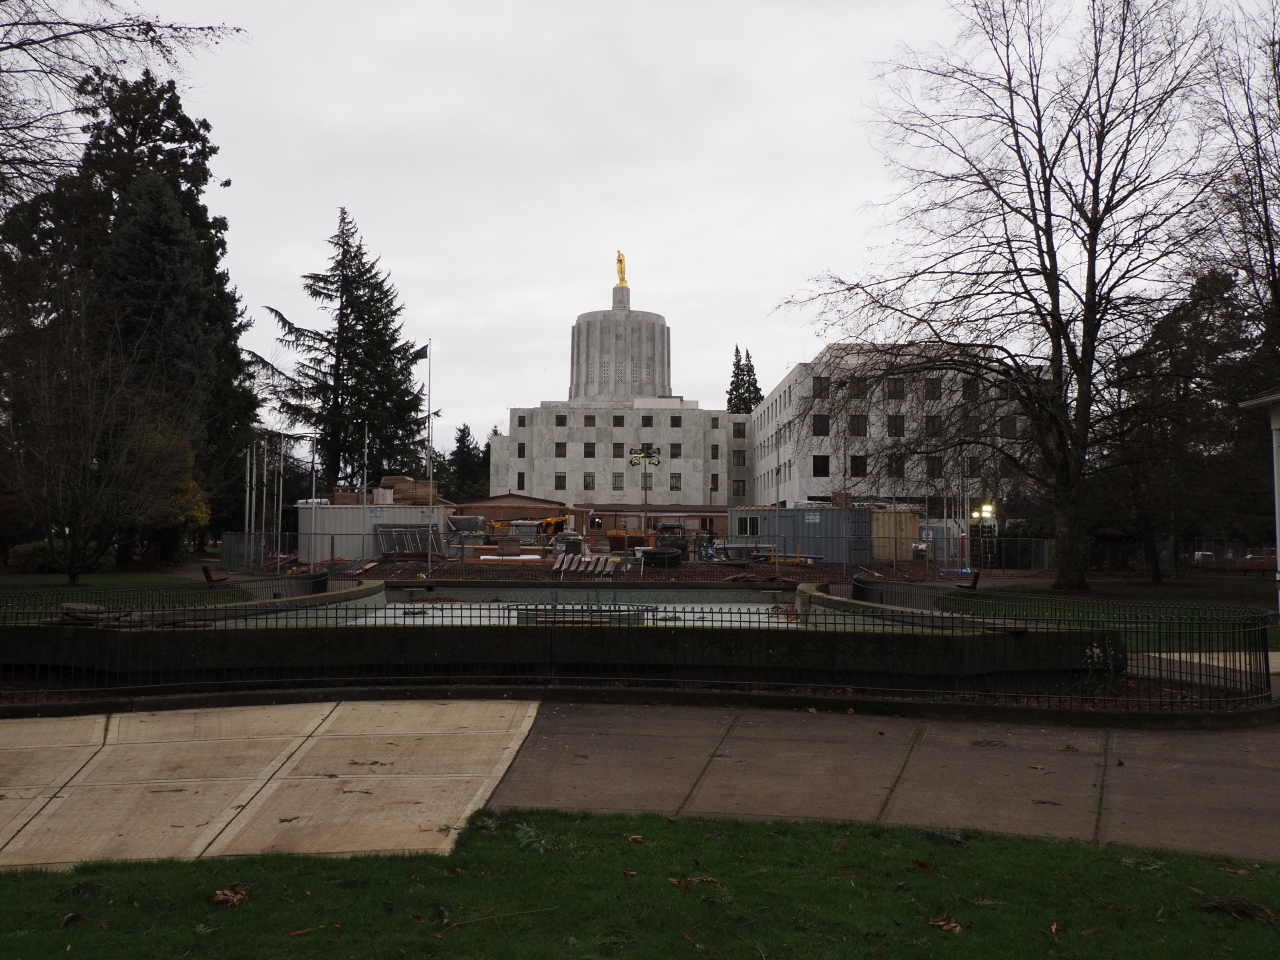 The legislature building, like all good government edifices, was under construction.